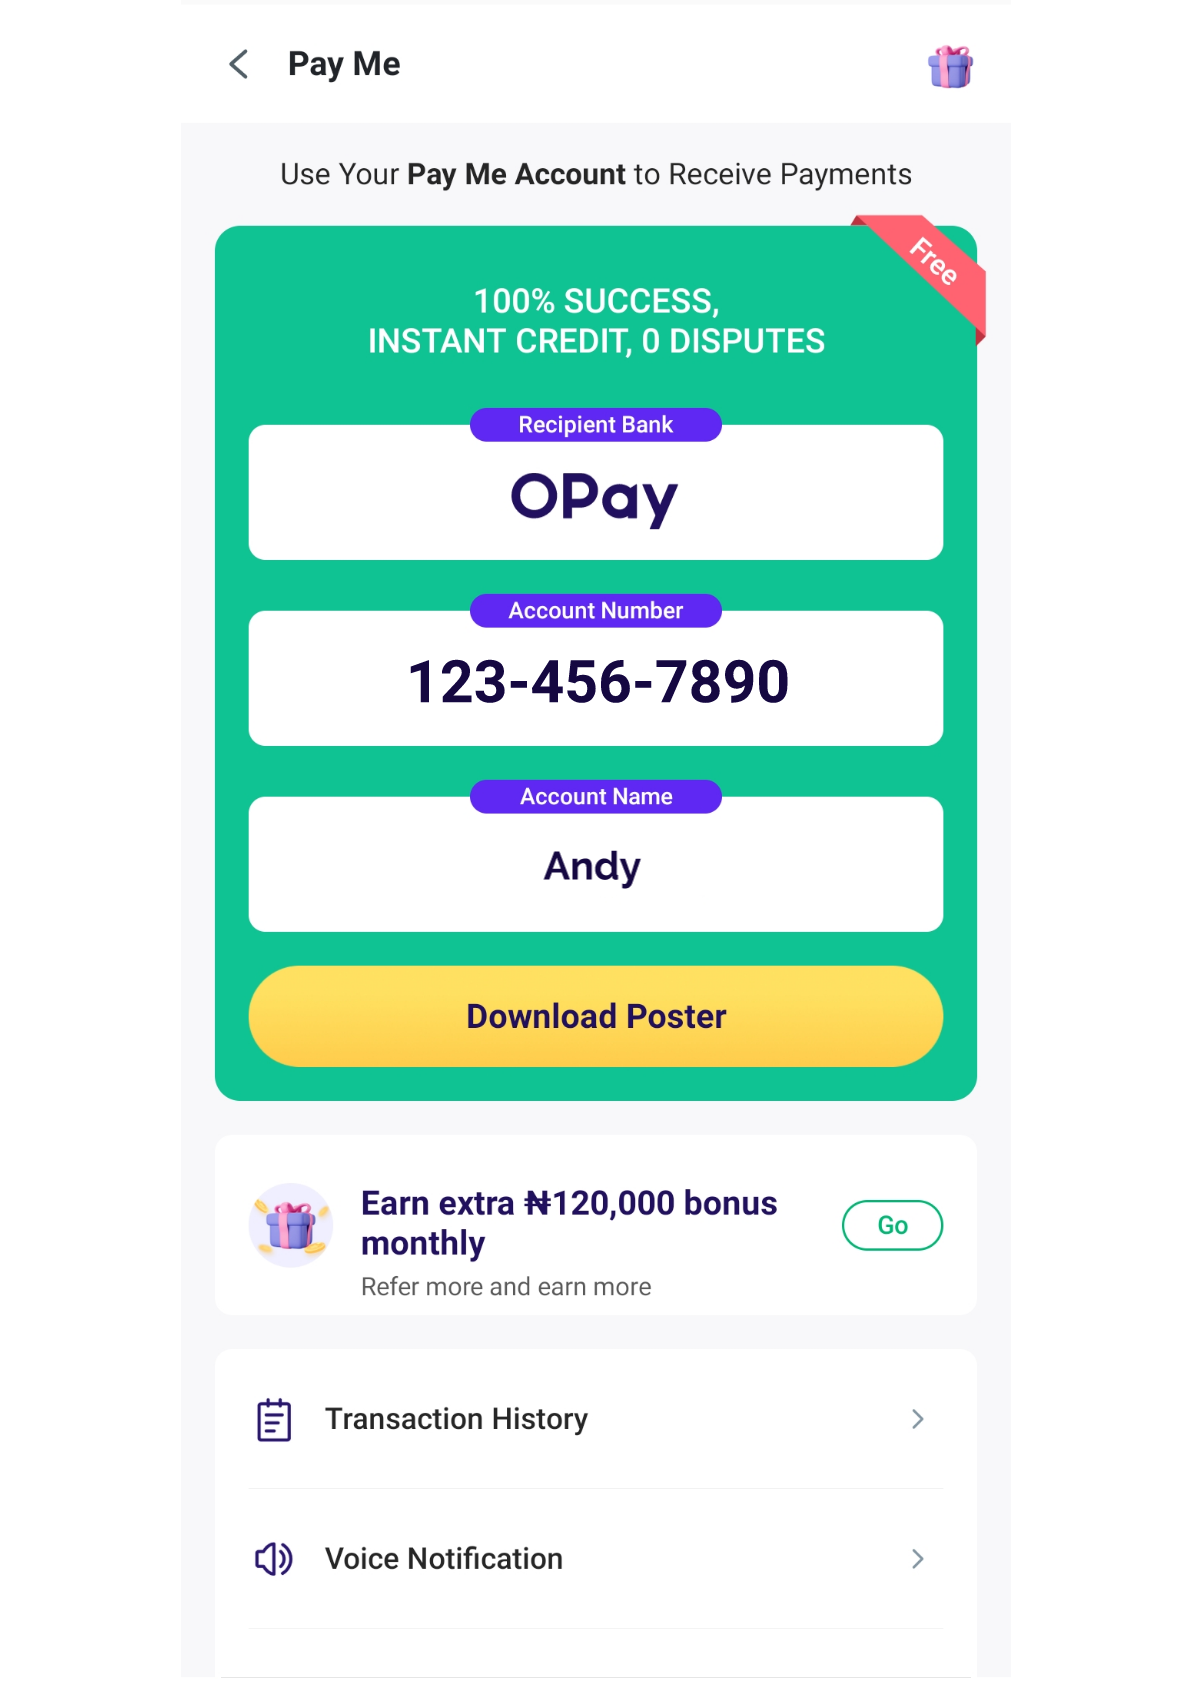 How To Find Your Opay Account Number – Not Your Phone Number